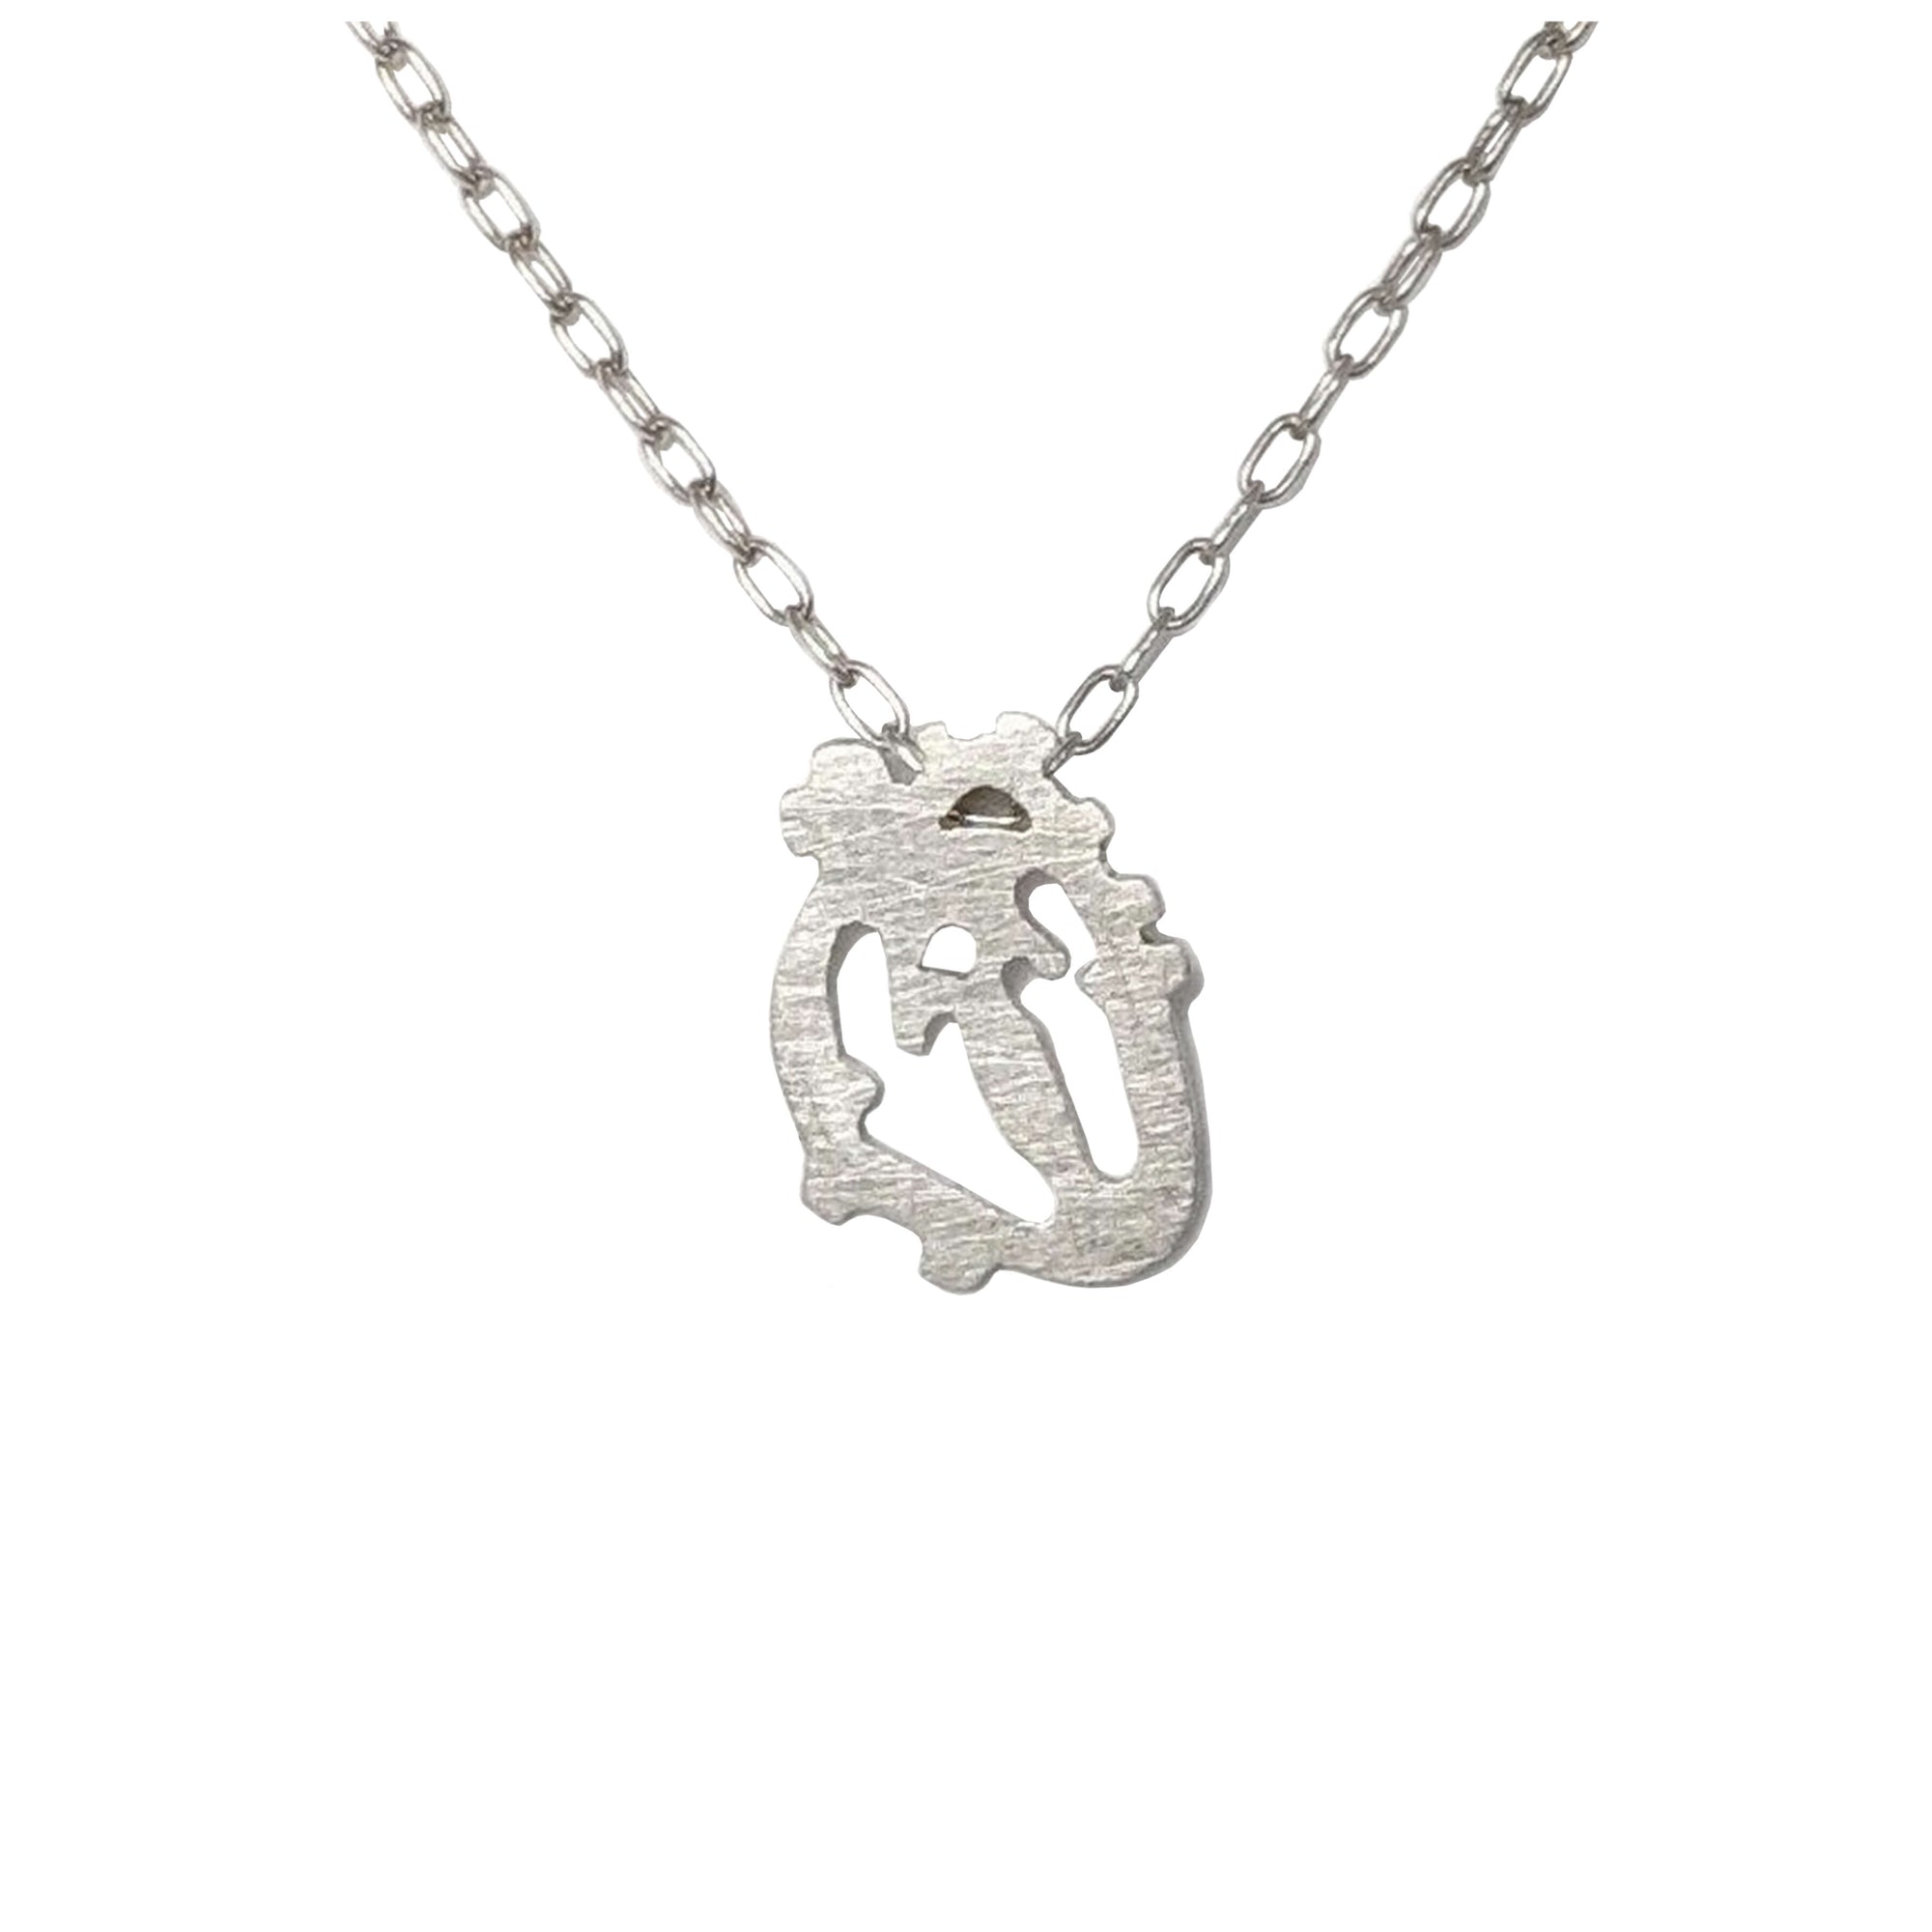 Sterling silver anatomical heart pendant from EC Design Jewelry in Minneapolis, MN. Handmade with recycled metal.